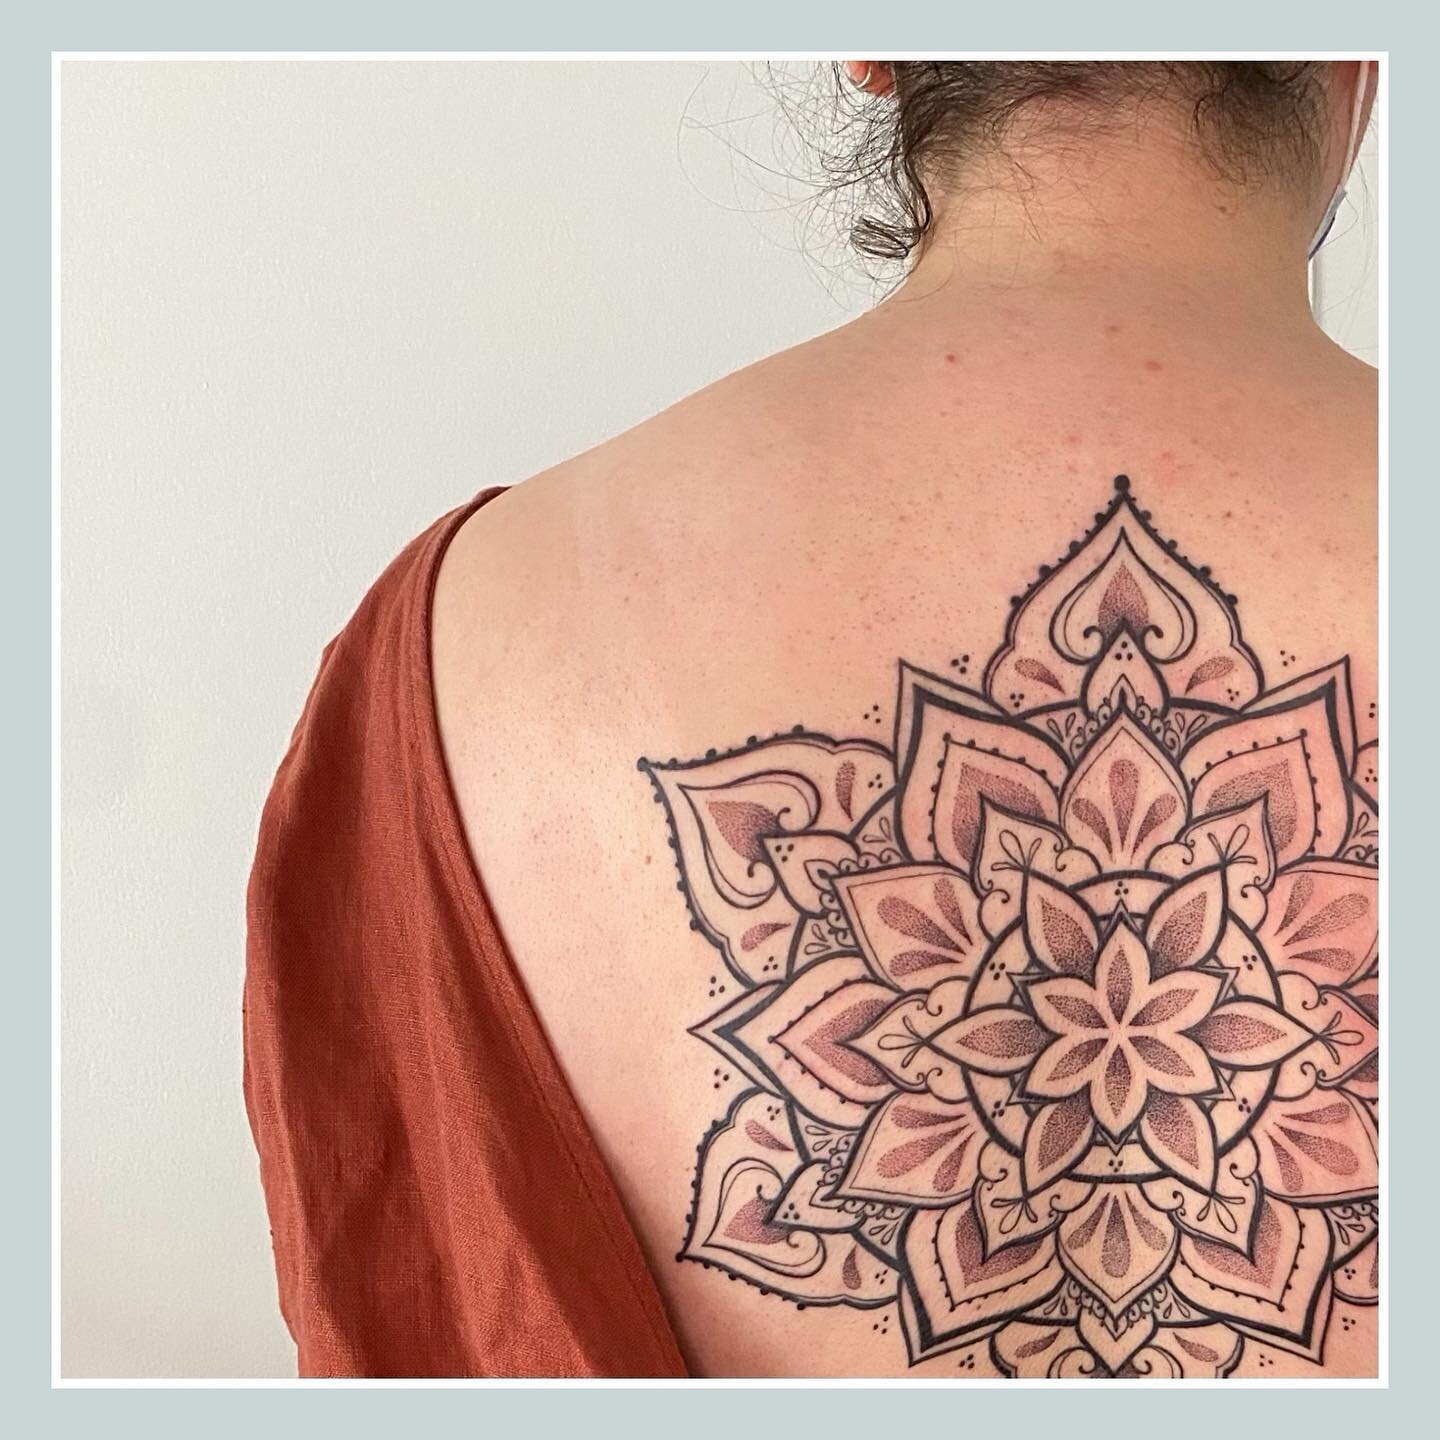 So pumped on this flash mandala that my client Carly purchased over quarantine and I finally got to do! I&rsquo;m so appreciative of all the support I received from my amazing clients this past year!
.
Swipe for more views 😍
.
.
.
.